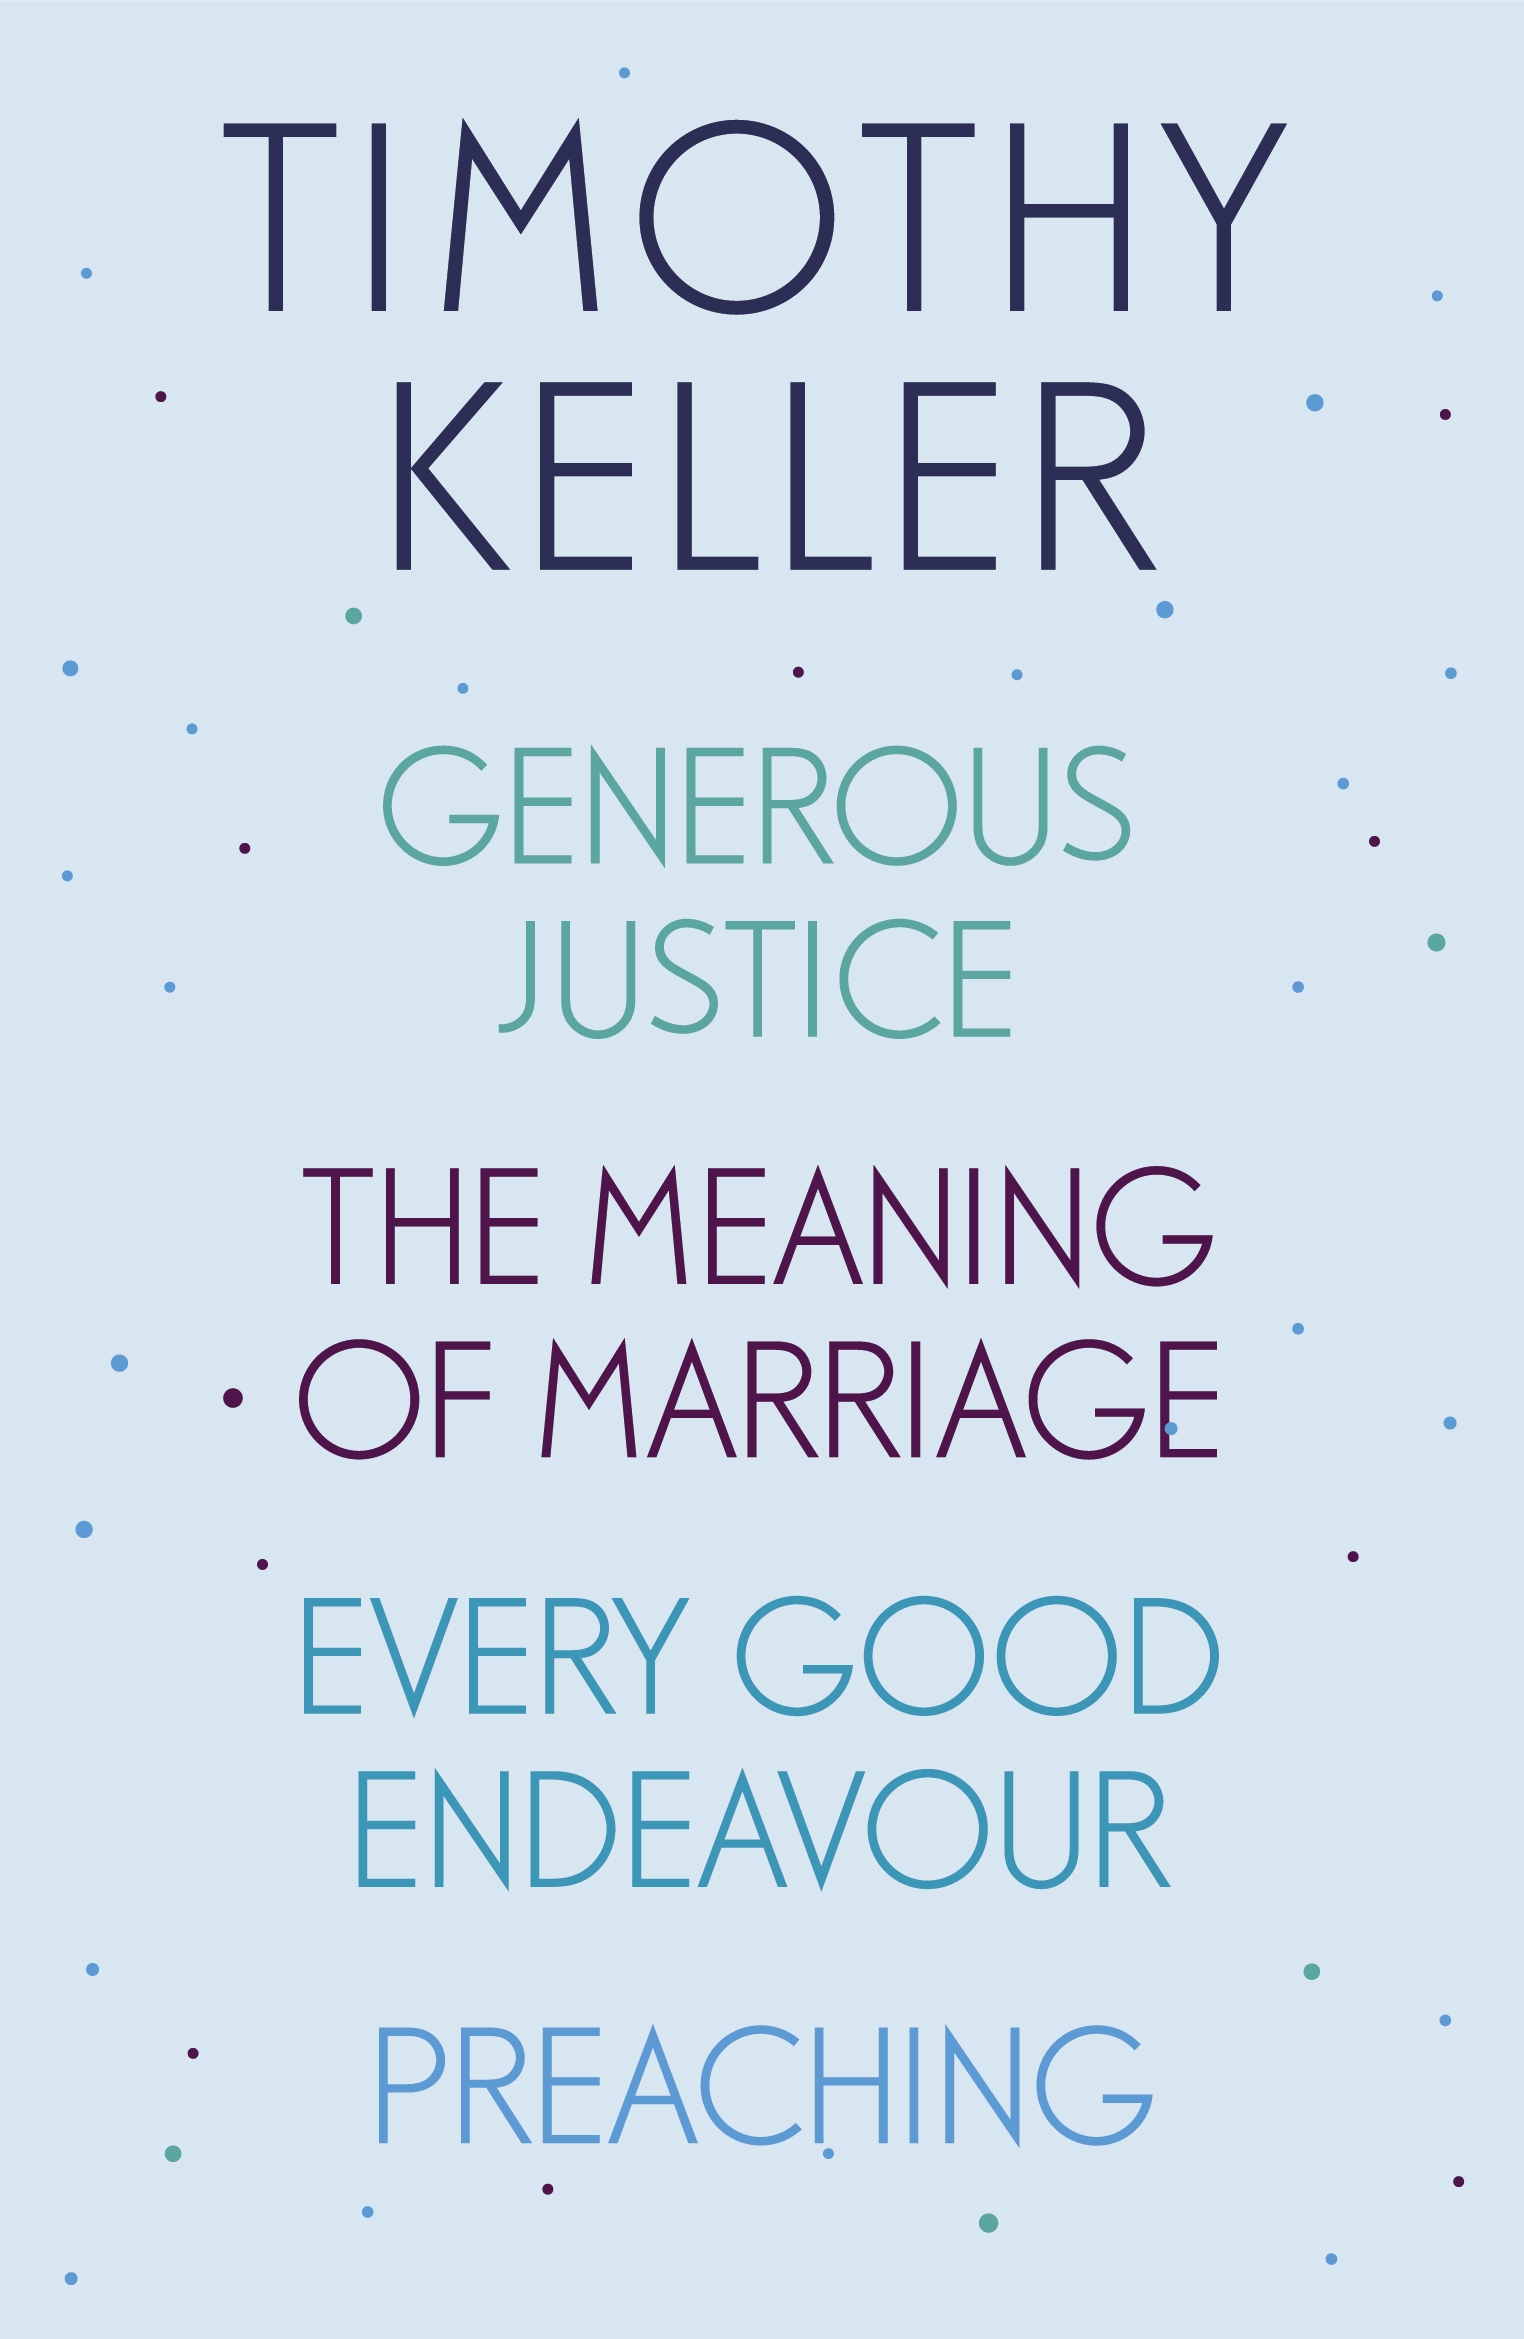 Timothy Keller: Generous Justice, The Meaning of Marriage, Every Good ...